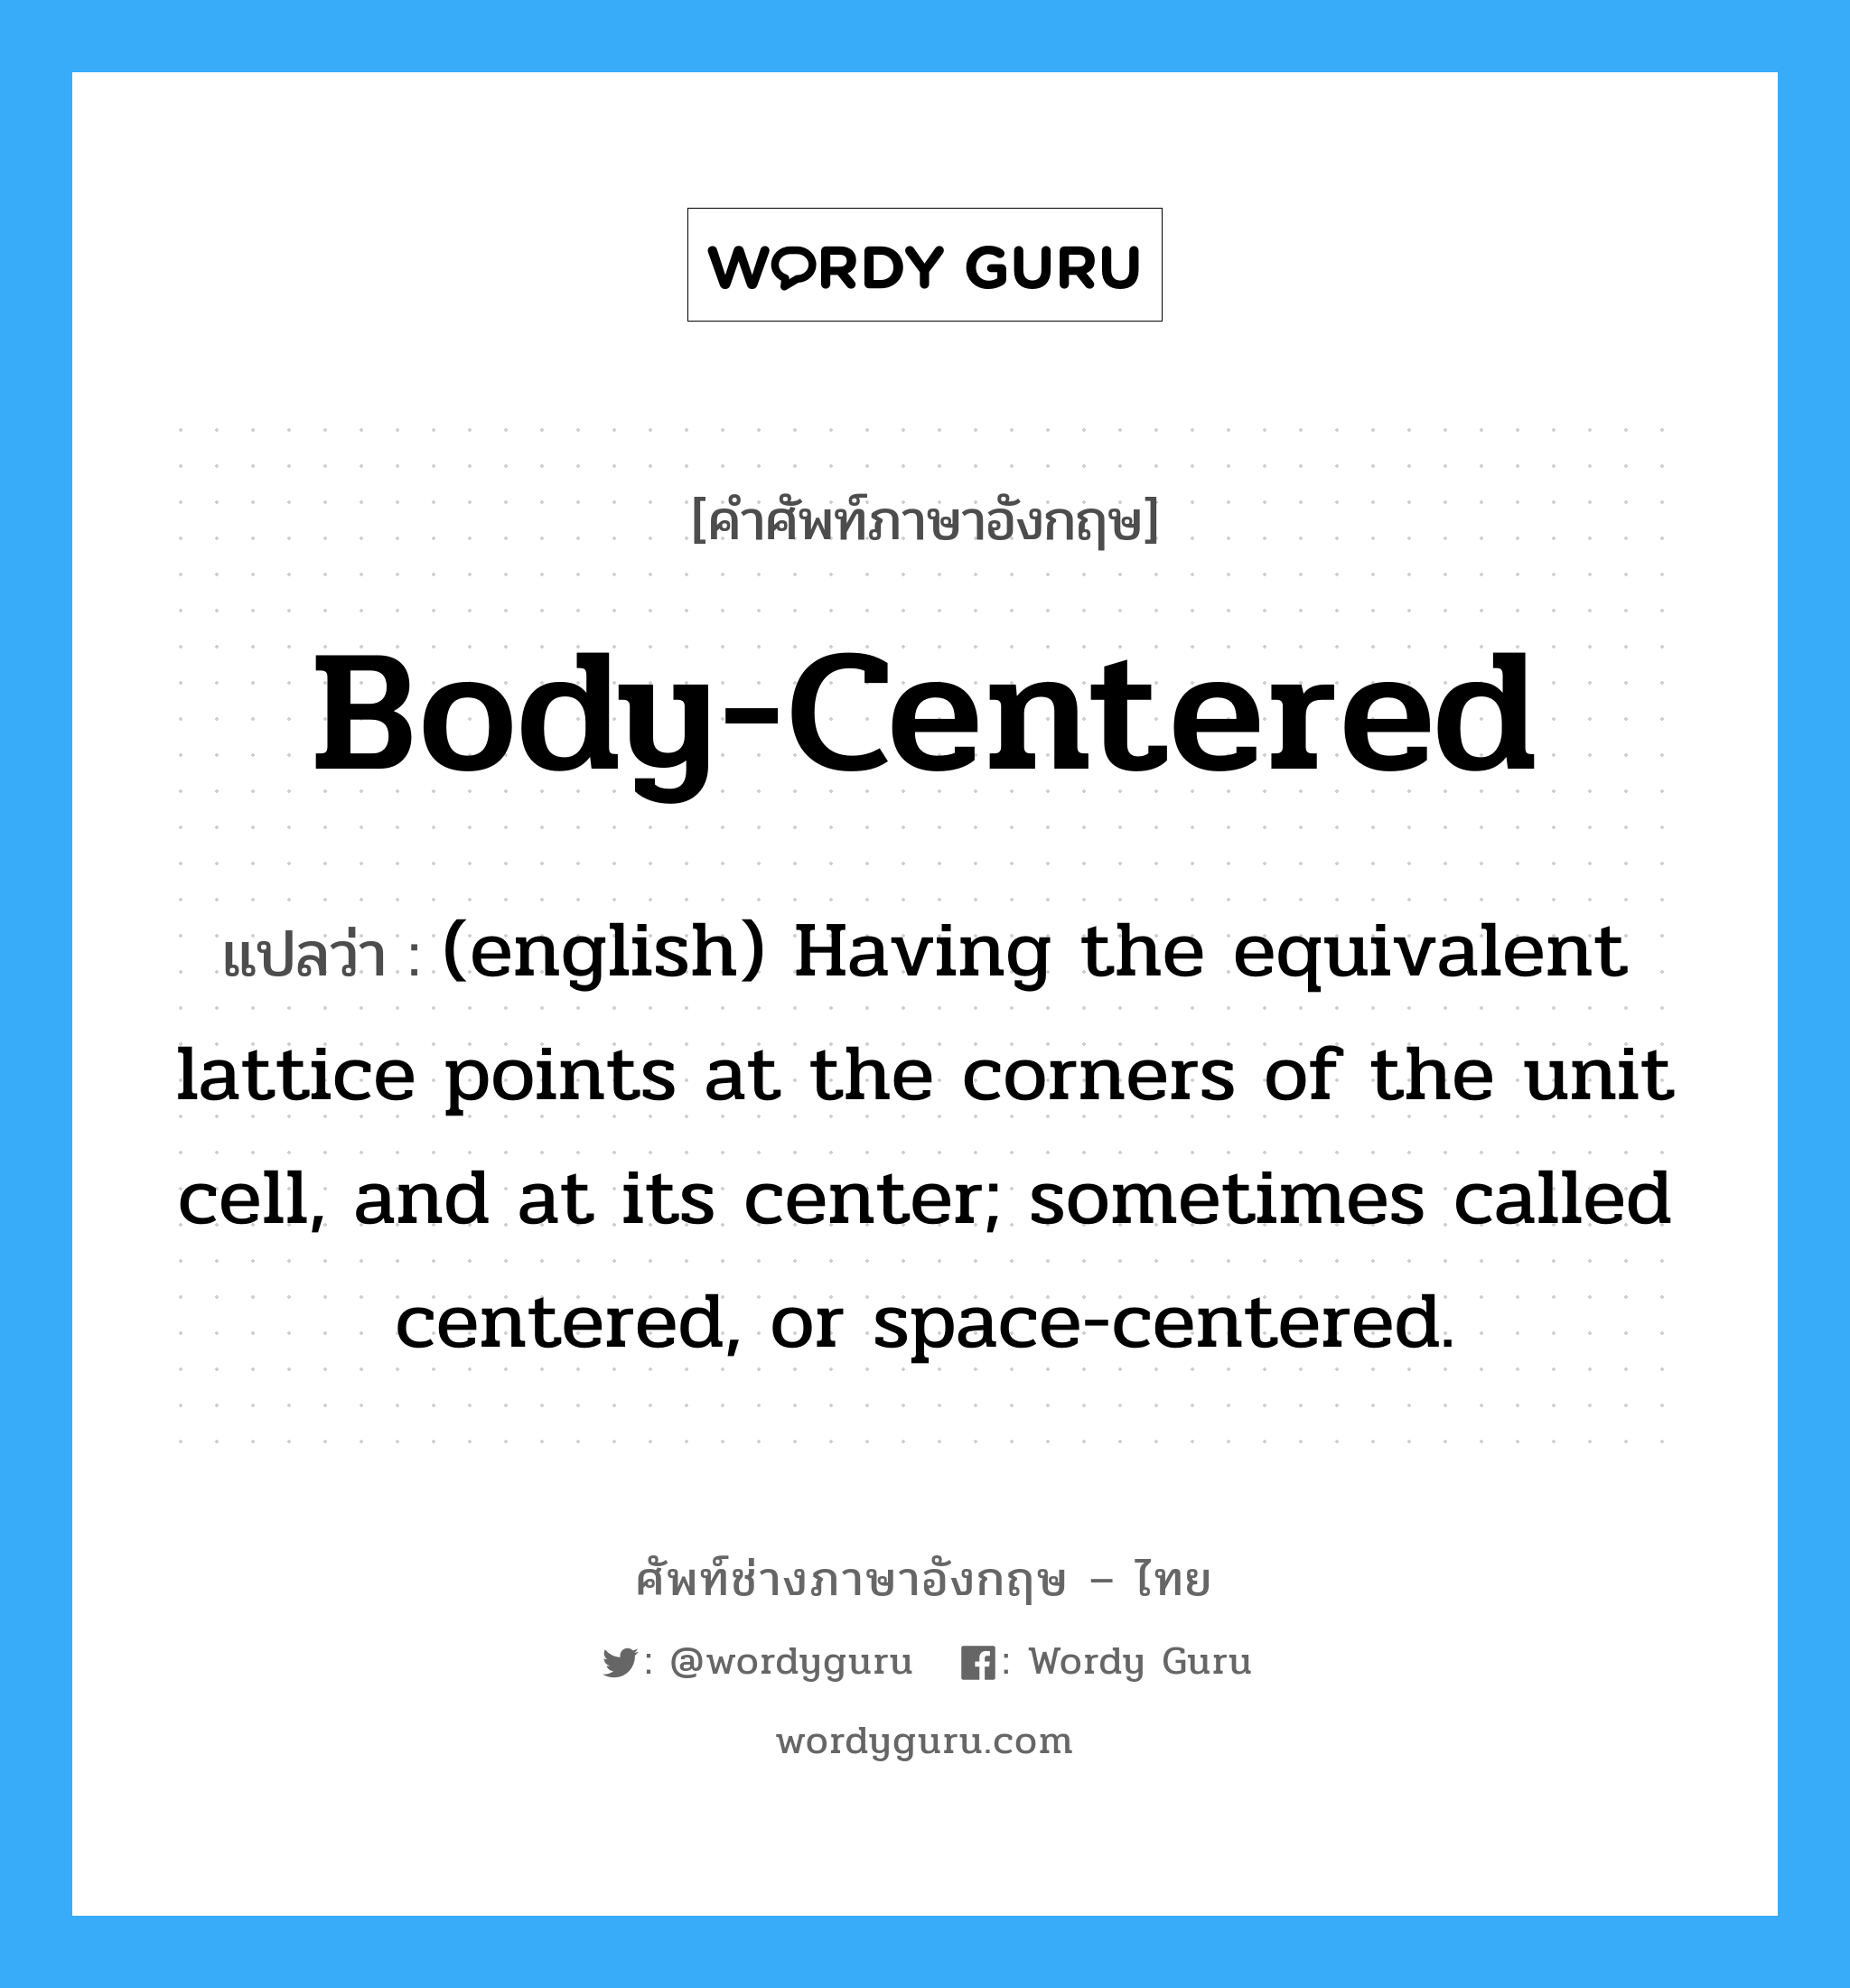 (english) Having the equivalent lattice points at the corners of the unit cell, and at its center; sometimes called centered, or space-centered. ภาษาอังกฤษ?, คำศัพท์ช่างภาษาอังกฤษ - ไทย (english) Having the equivalent lattice points at the corners of the unit cell, and at its center; sometimes called centered, or space-centered. คำศัพท์ภาษาอังกฤษ (english) Having the equivalent lattice points at the corners of the unit cell, and at its center; sometimes called centered, or space-centered. แปลว่า Body-Centered